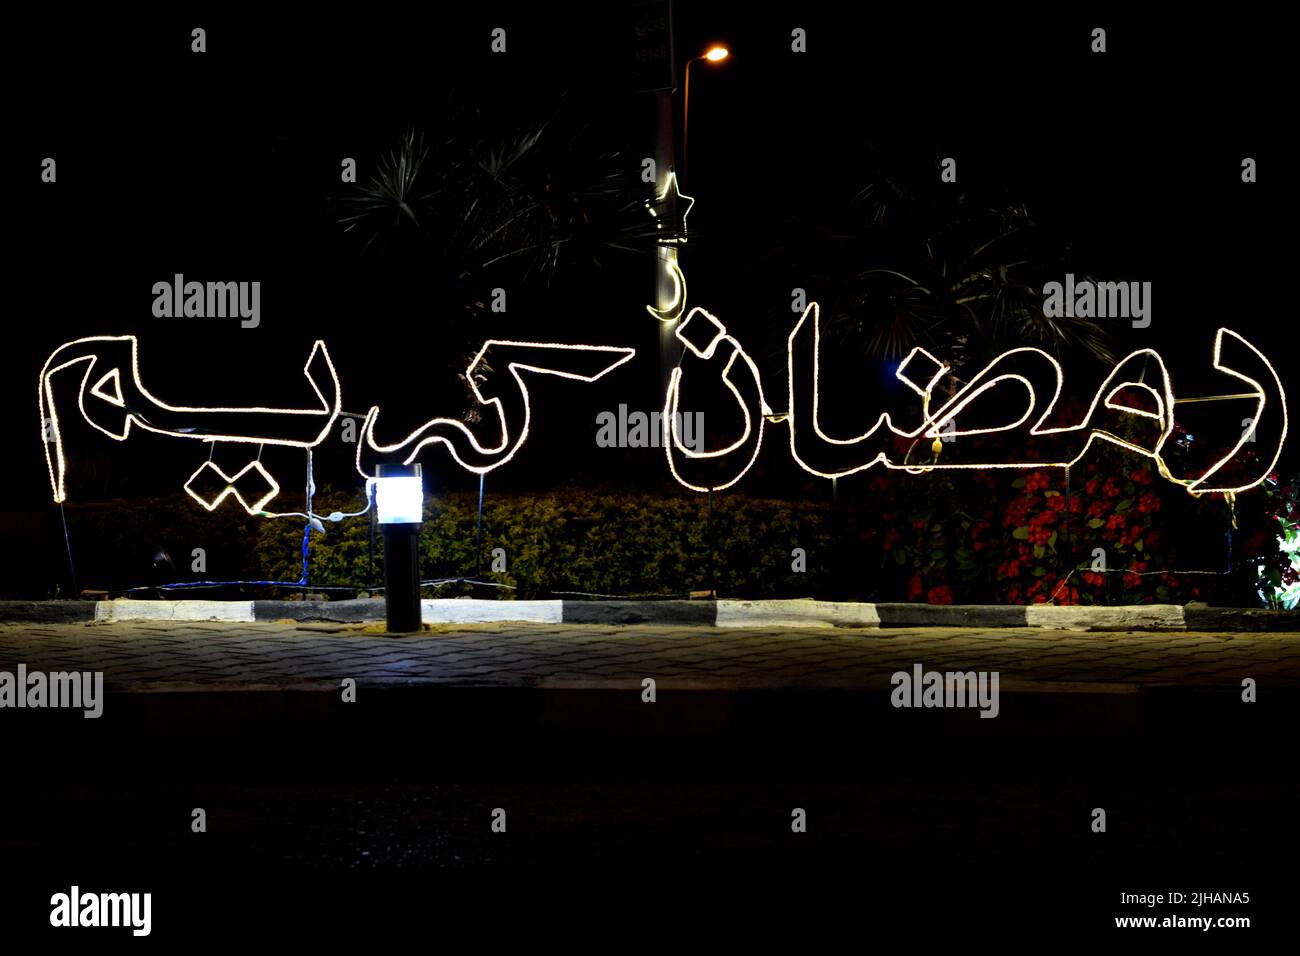 Cairo, Egypt, March 25 2022: An Arabic text Ramadan Kareem, Translation (Generous Happy Ramadan) made with led lights in the street as a festive sign Stock Photo